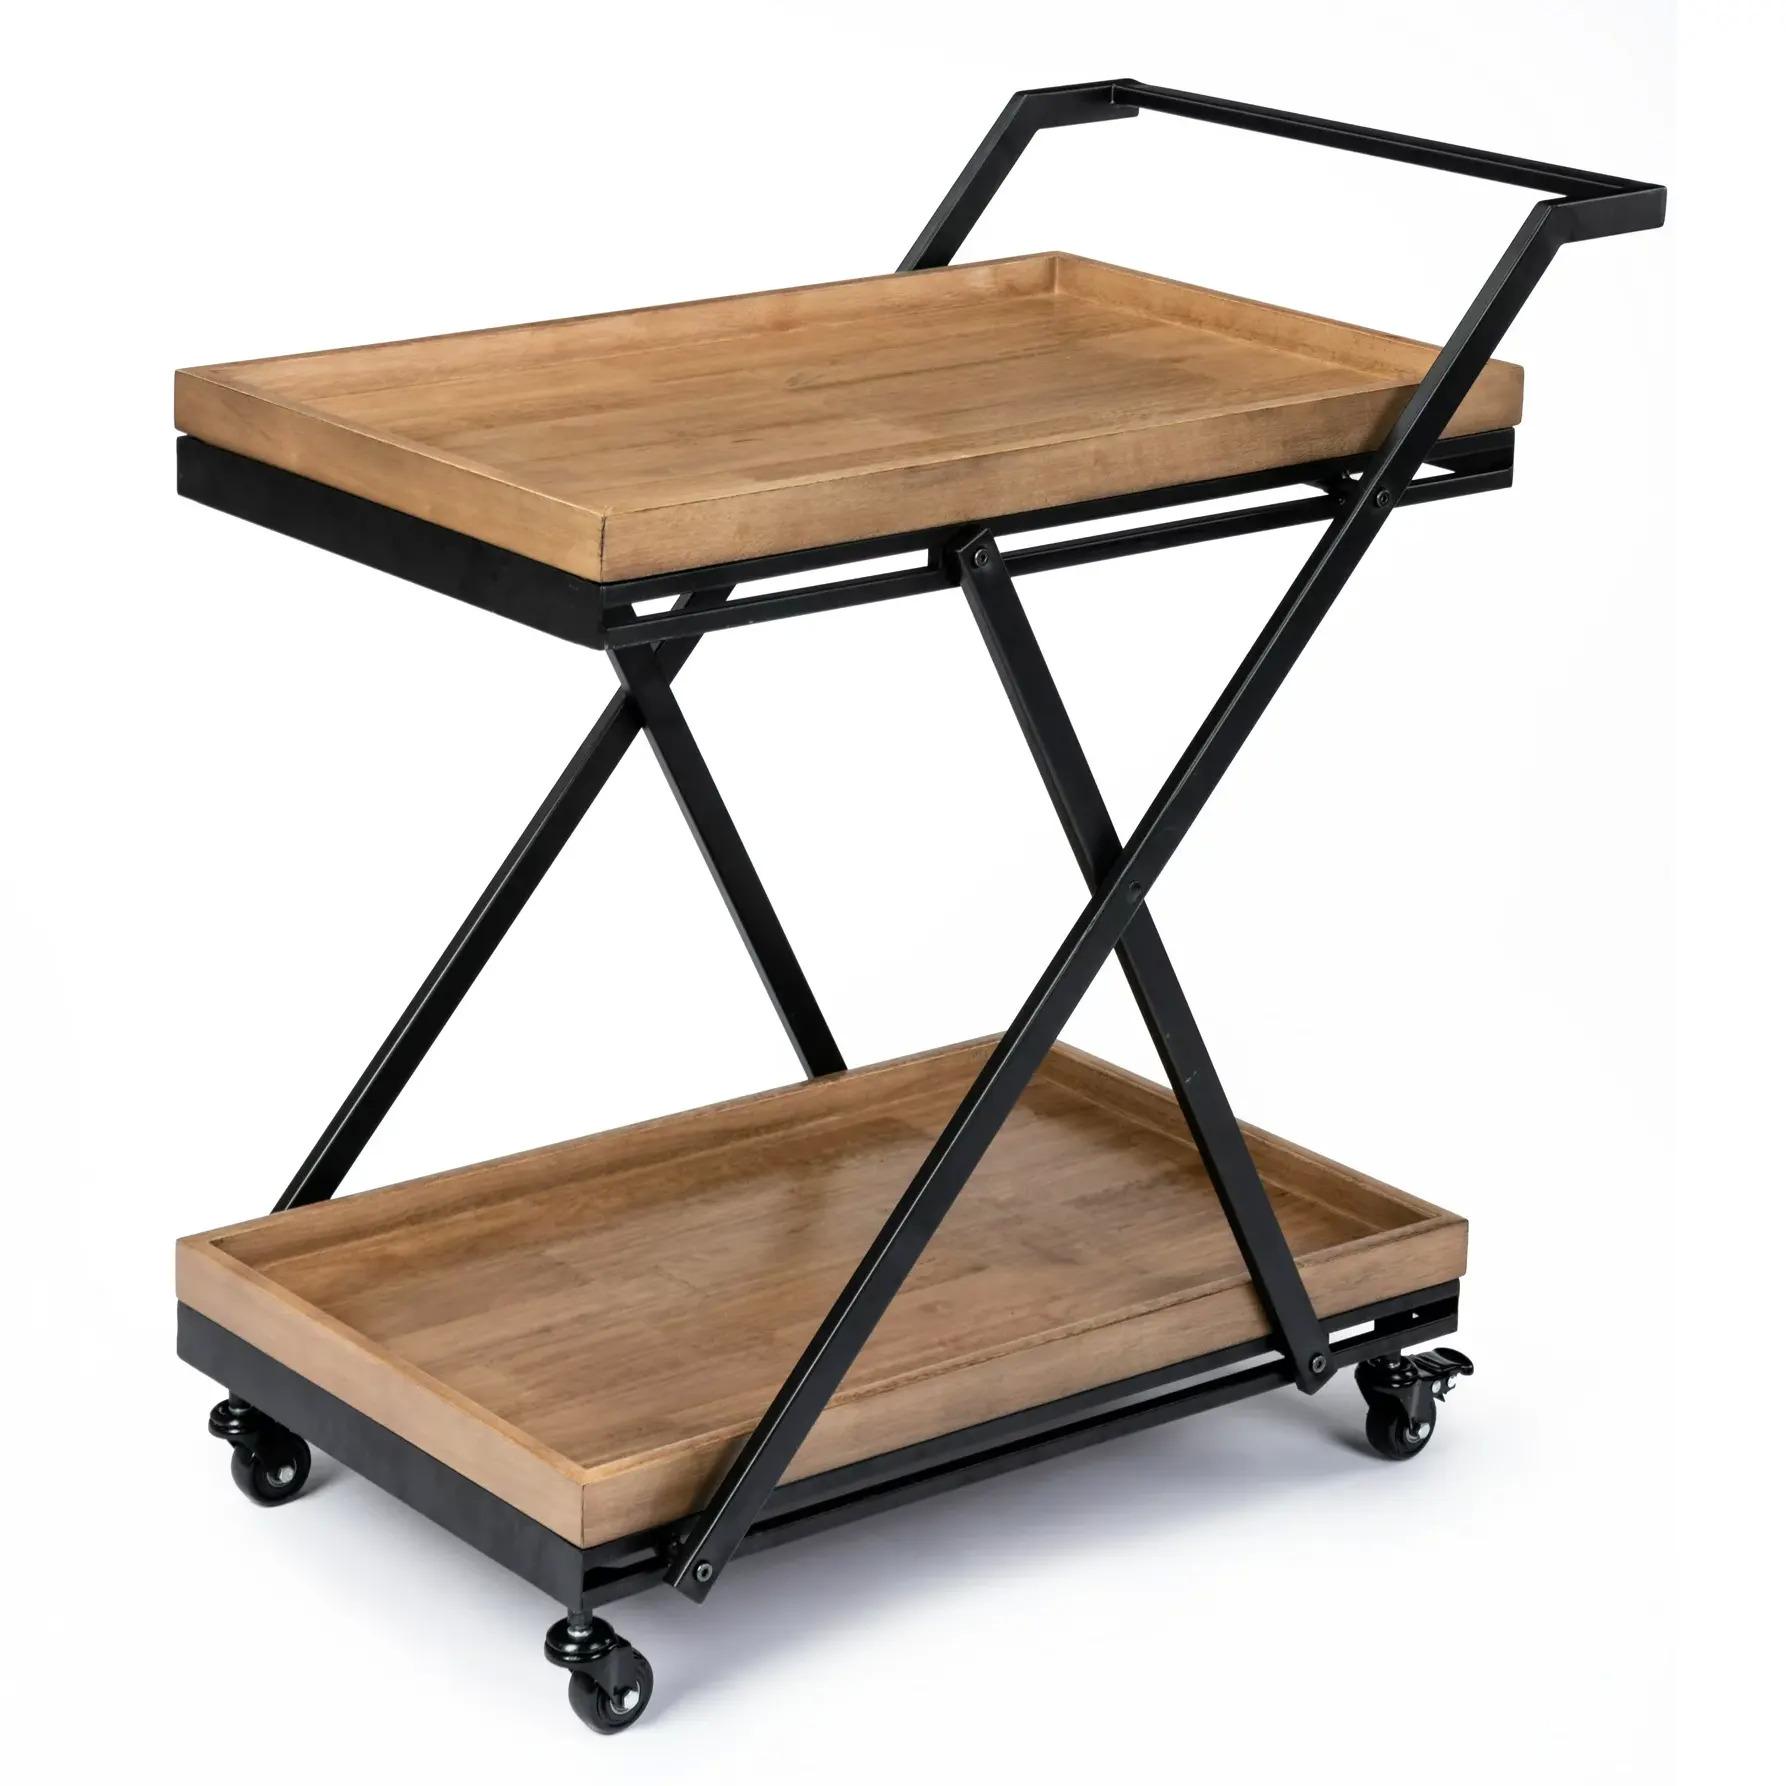 Better Homes and Gardens Entertainment Cart for $49 Shipped